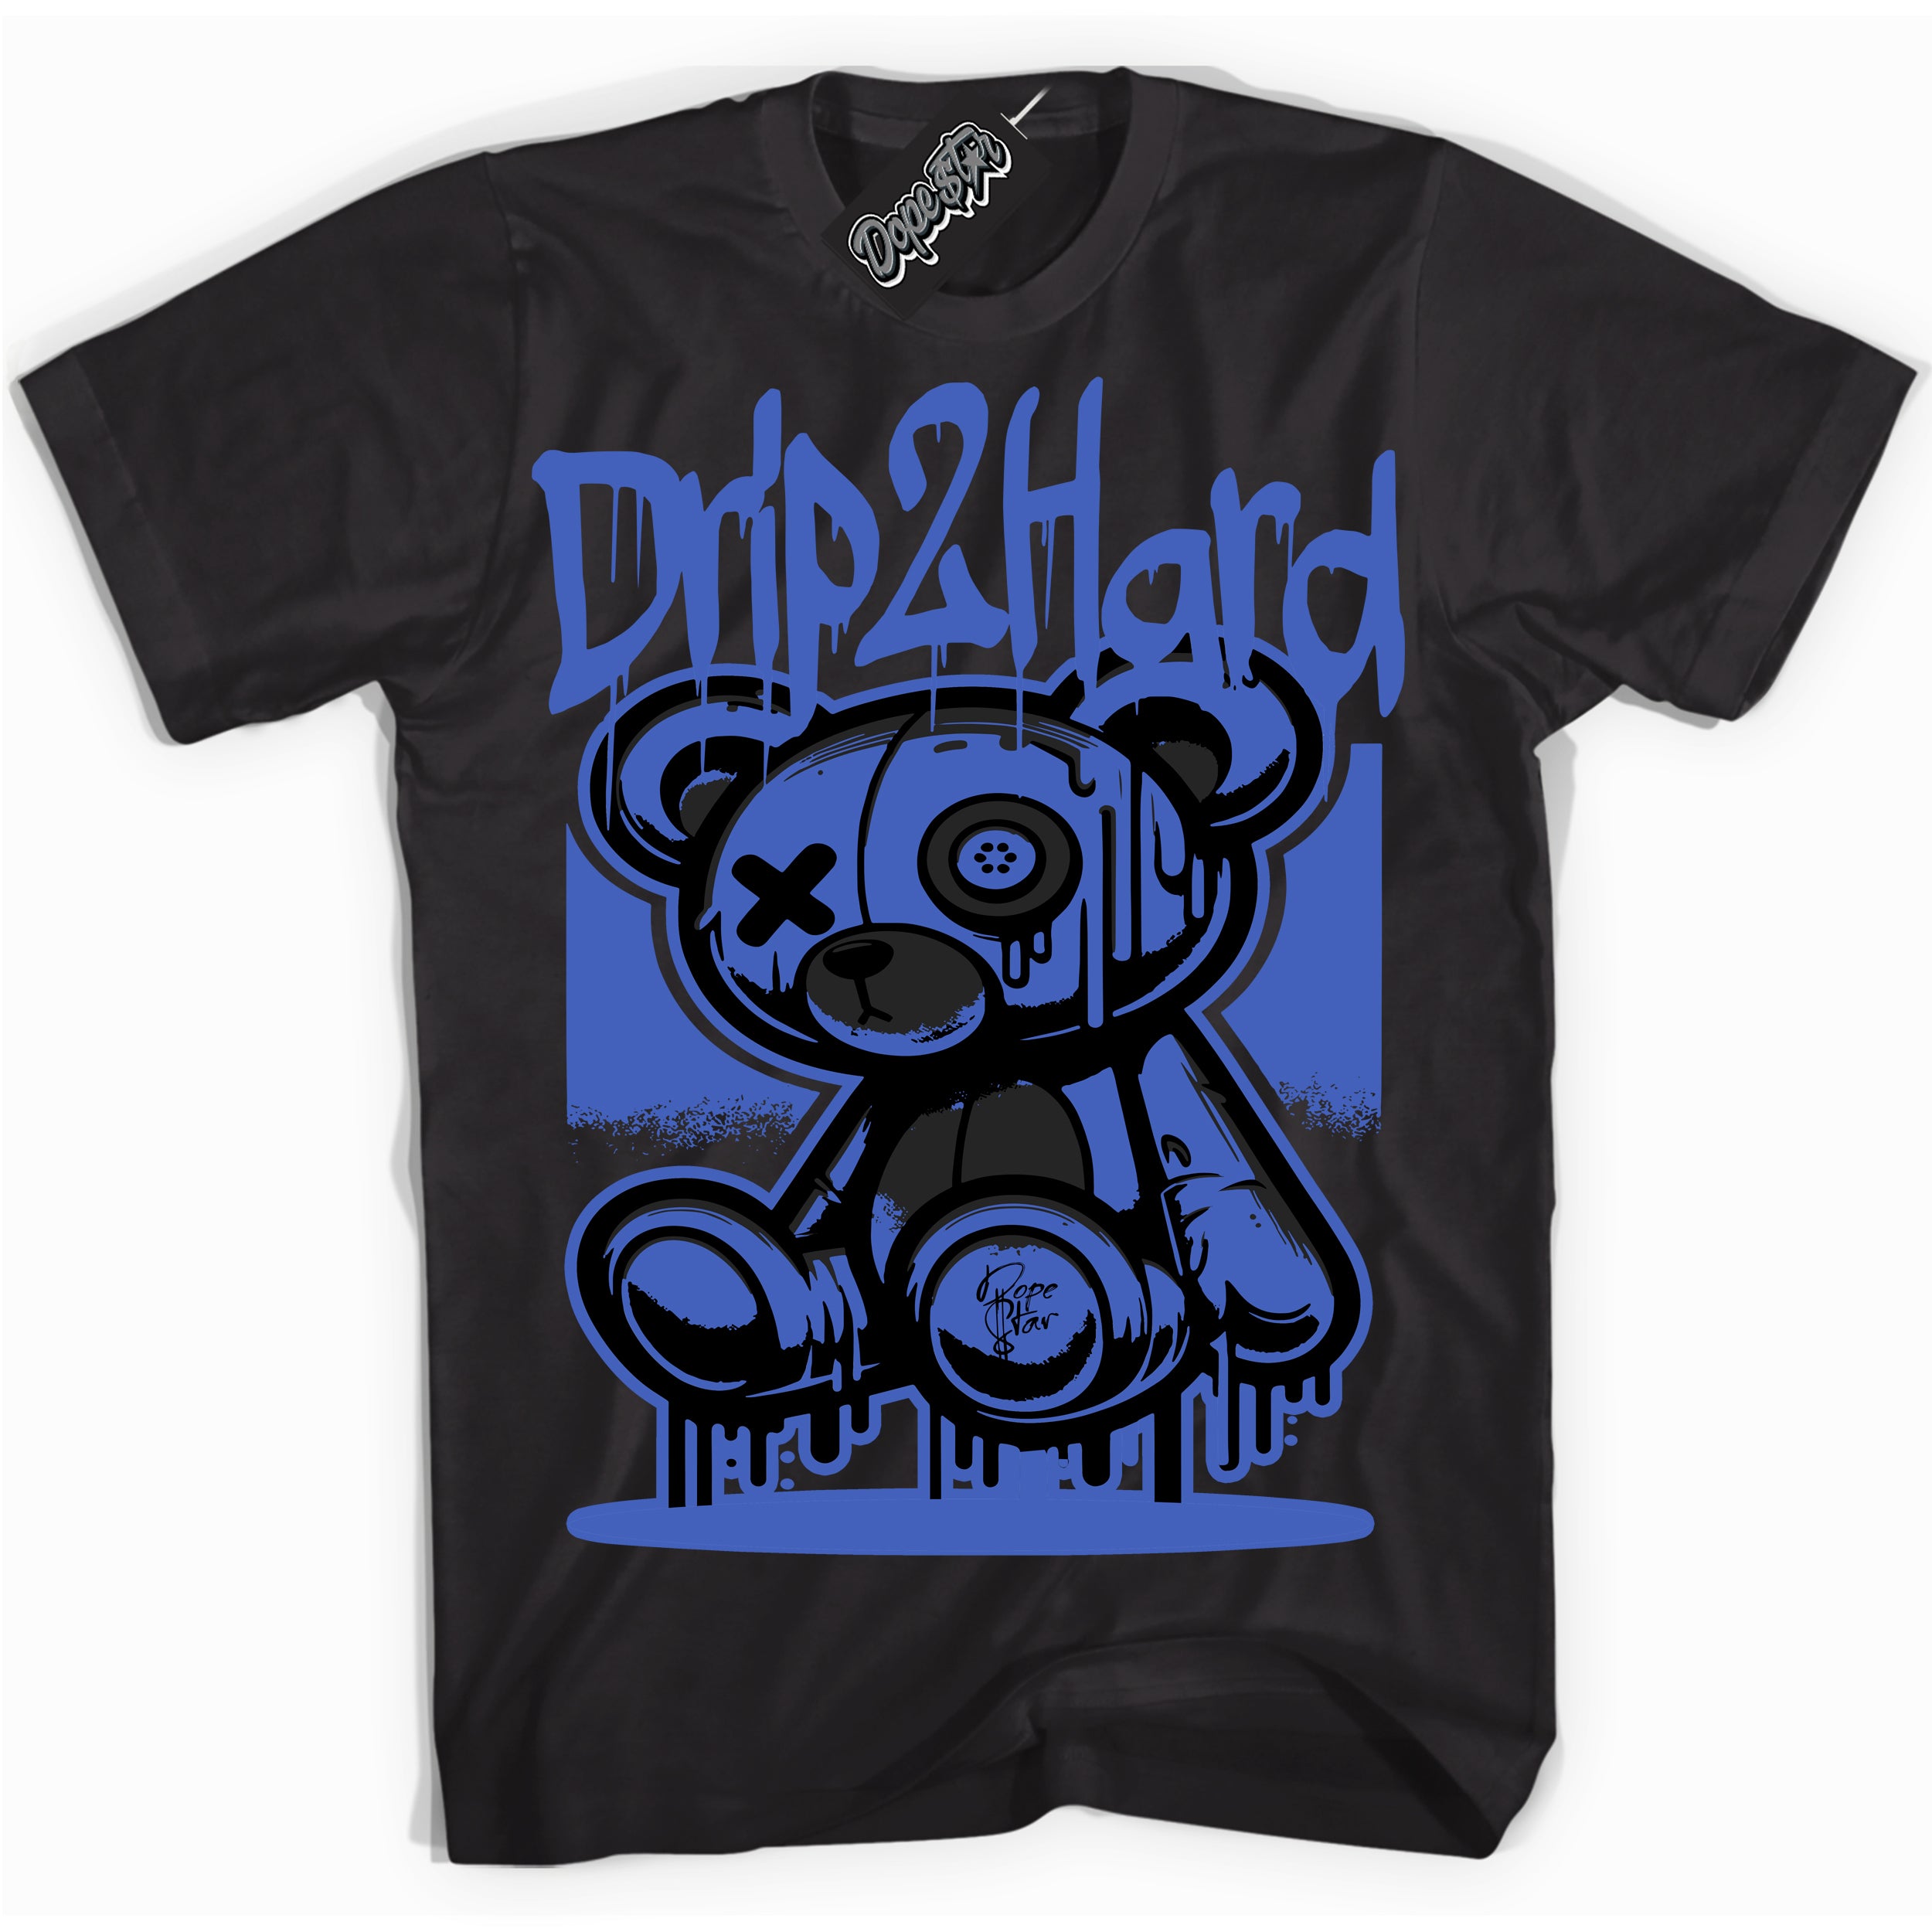 Cool Black graphic tee with “ Drip 2 Hard ” design, that perfectly matches Yeezy Boost 350 V2 Dazzling Blue